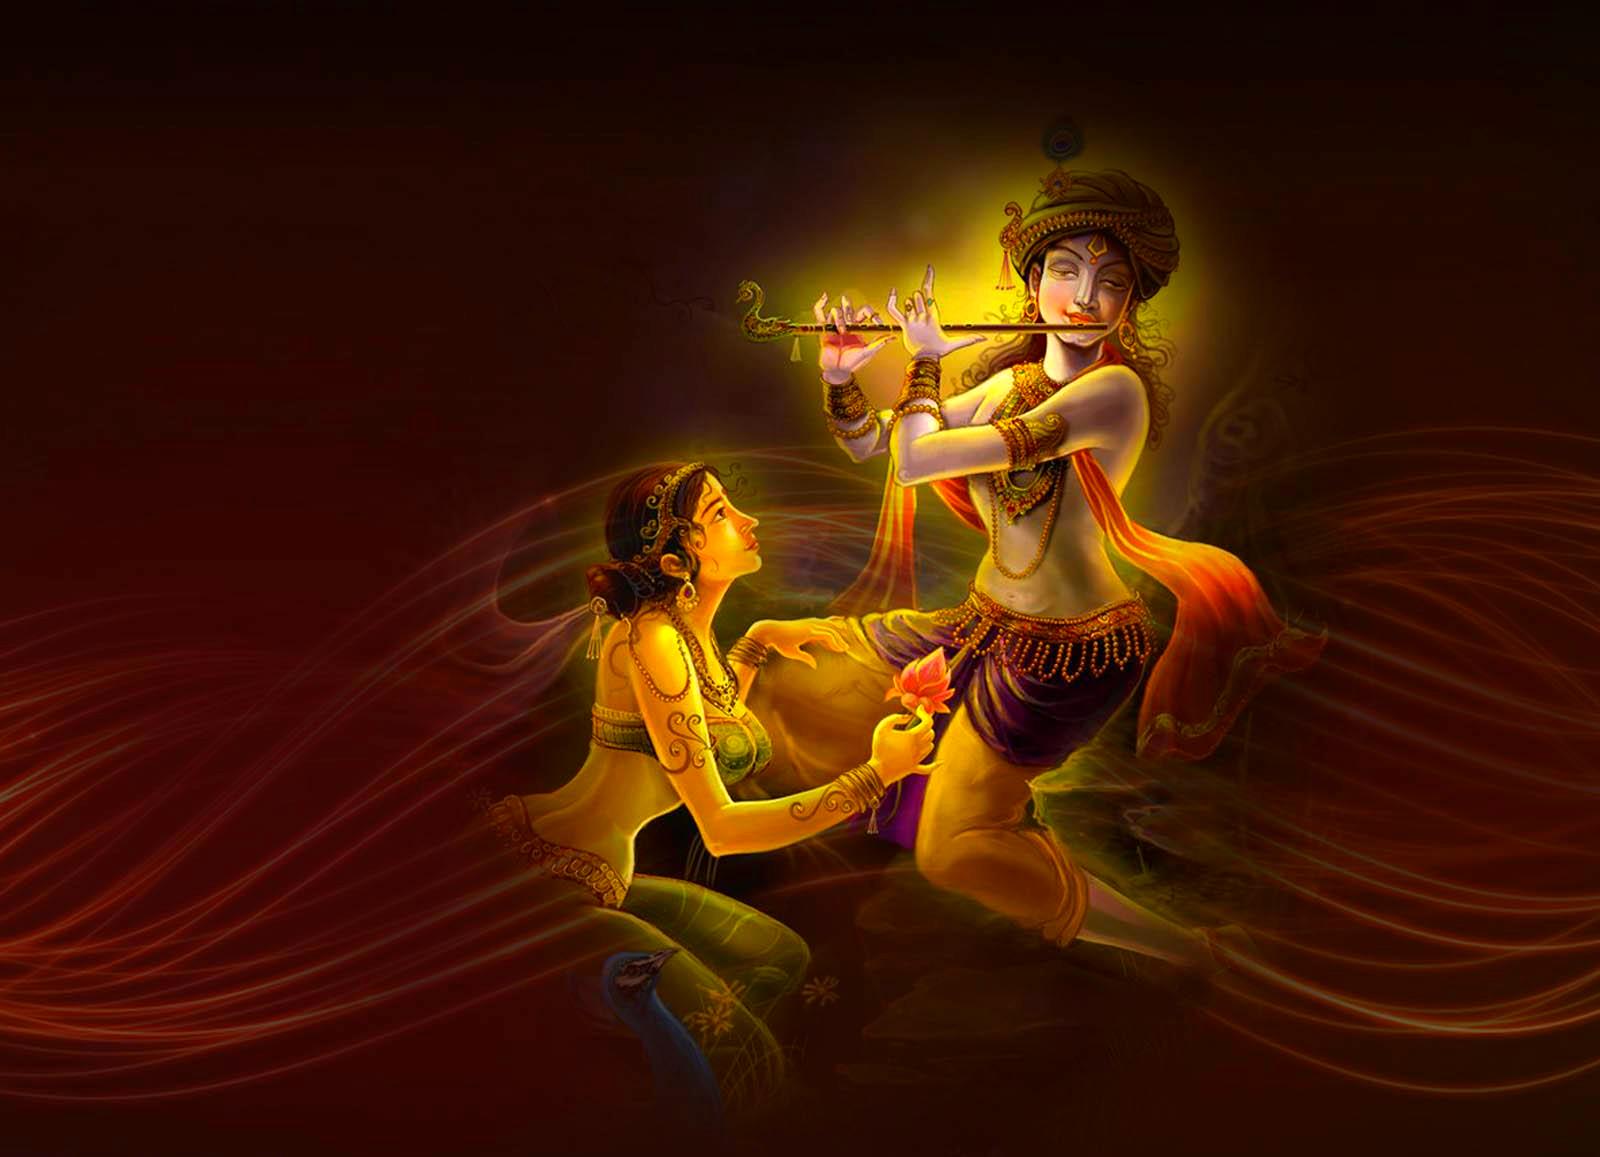 Vishnu Chalisa, Aarti, Wallpapers:Amazon.com:Appstore for Android